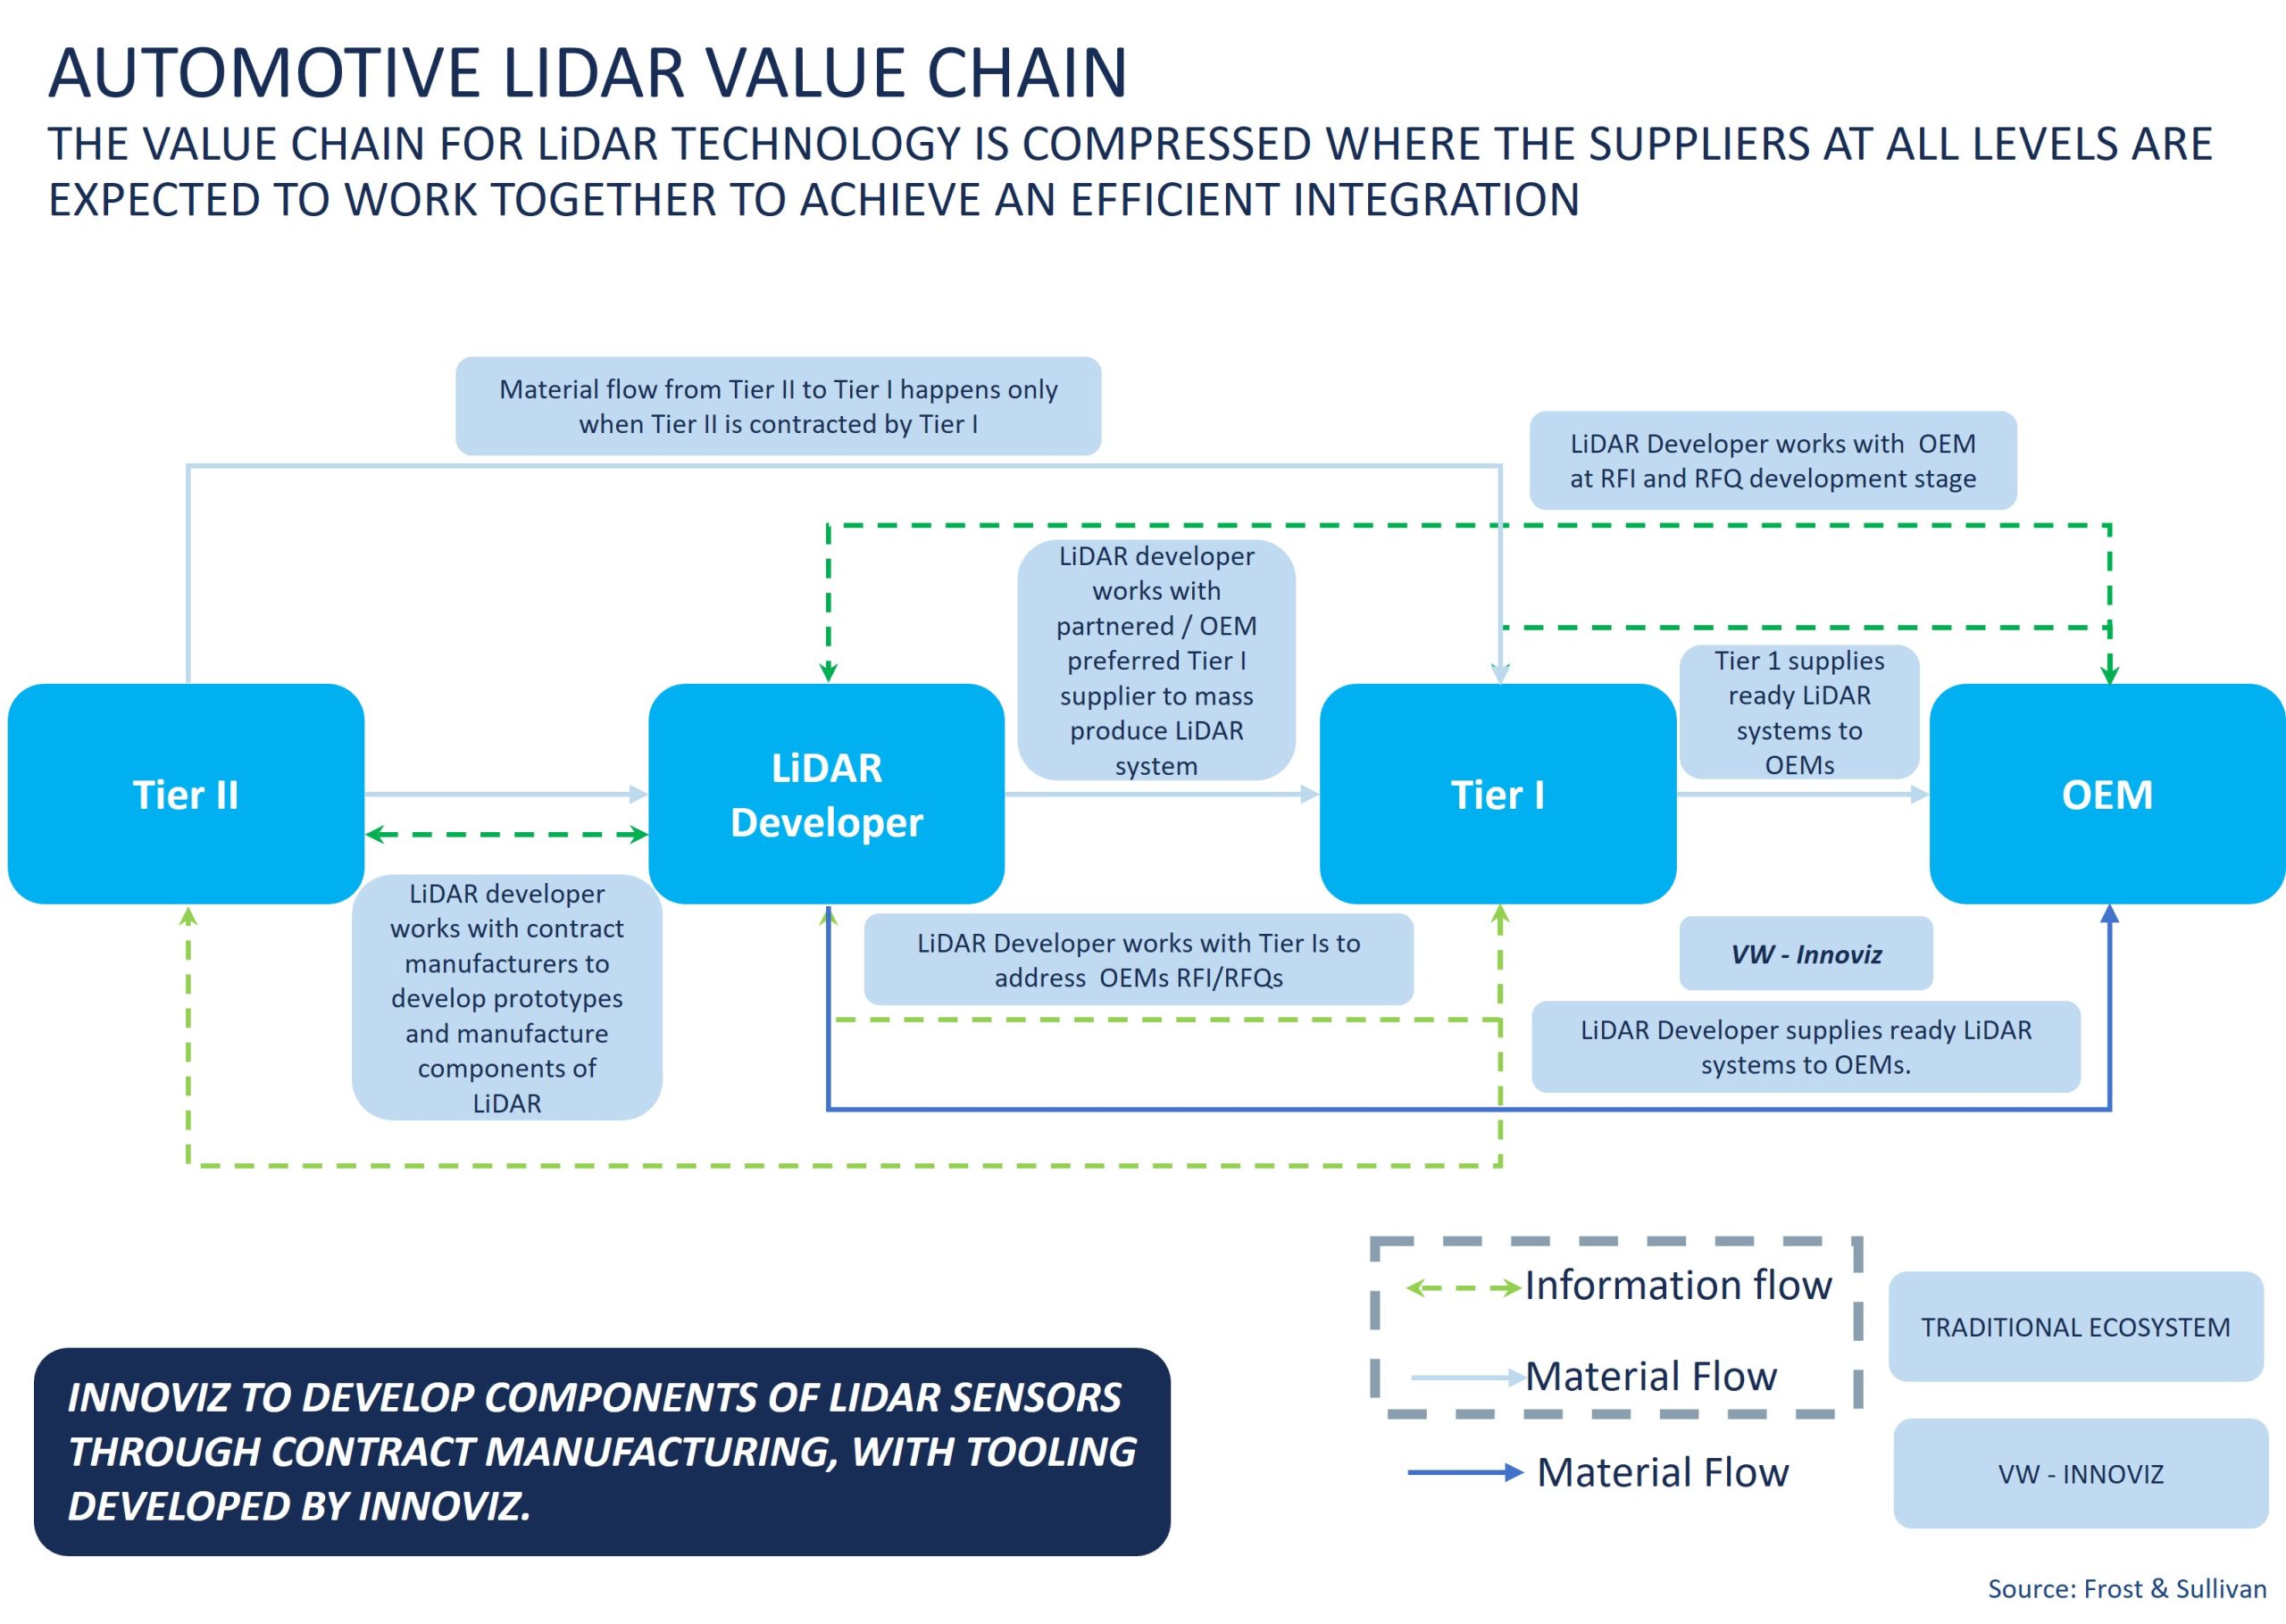 AUTOMOTIVE LIDAR VALUE CHAIN - THE VALUE CHAIN FOR LiDAR TECHNOLOGY IS COMPRESSED WHERE THE SUPPLIERS AT ALL LEVELS ARE EXPECTED TO WORK TOGETHER TO ACHIEVE AN EFFICIENT INTEGRATION